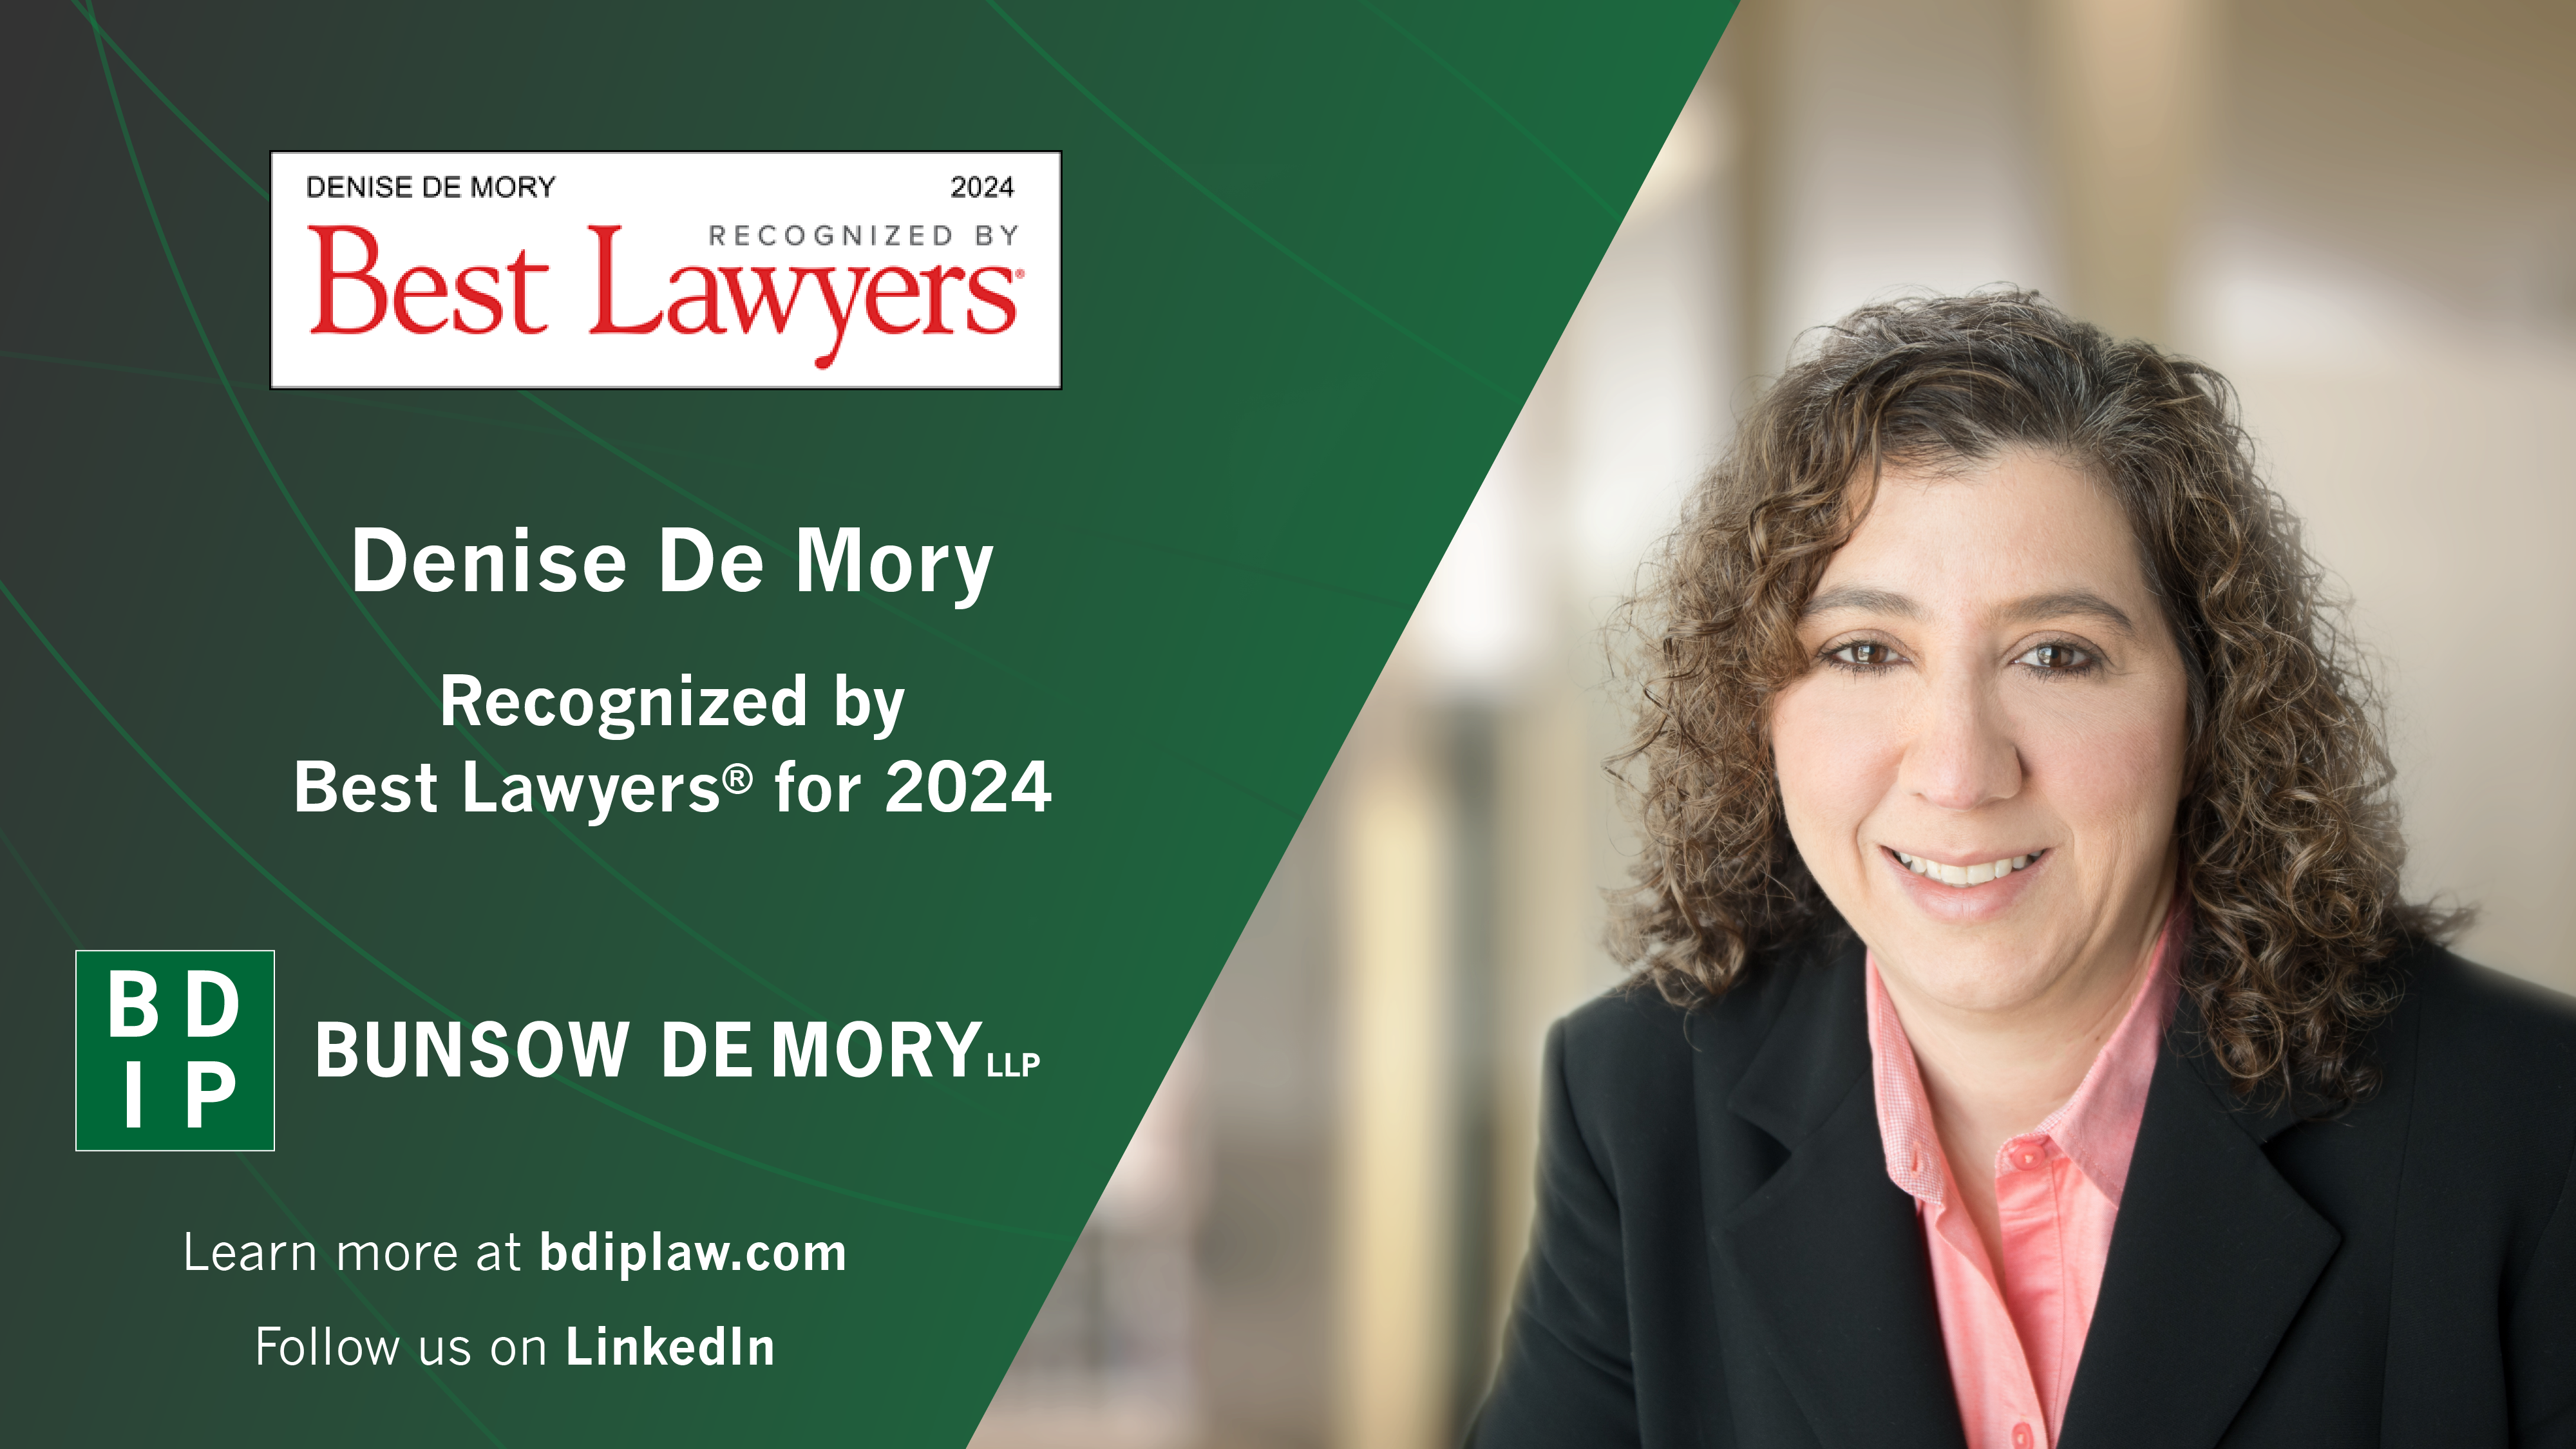 Denise De Mory Recognized by Best Lawyers for 2024